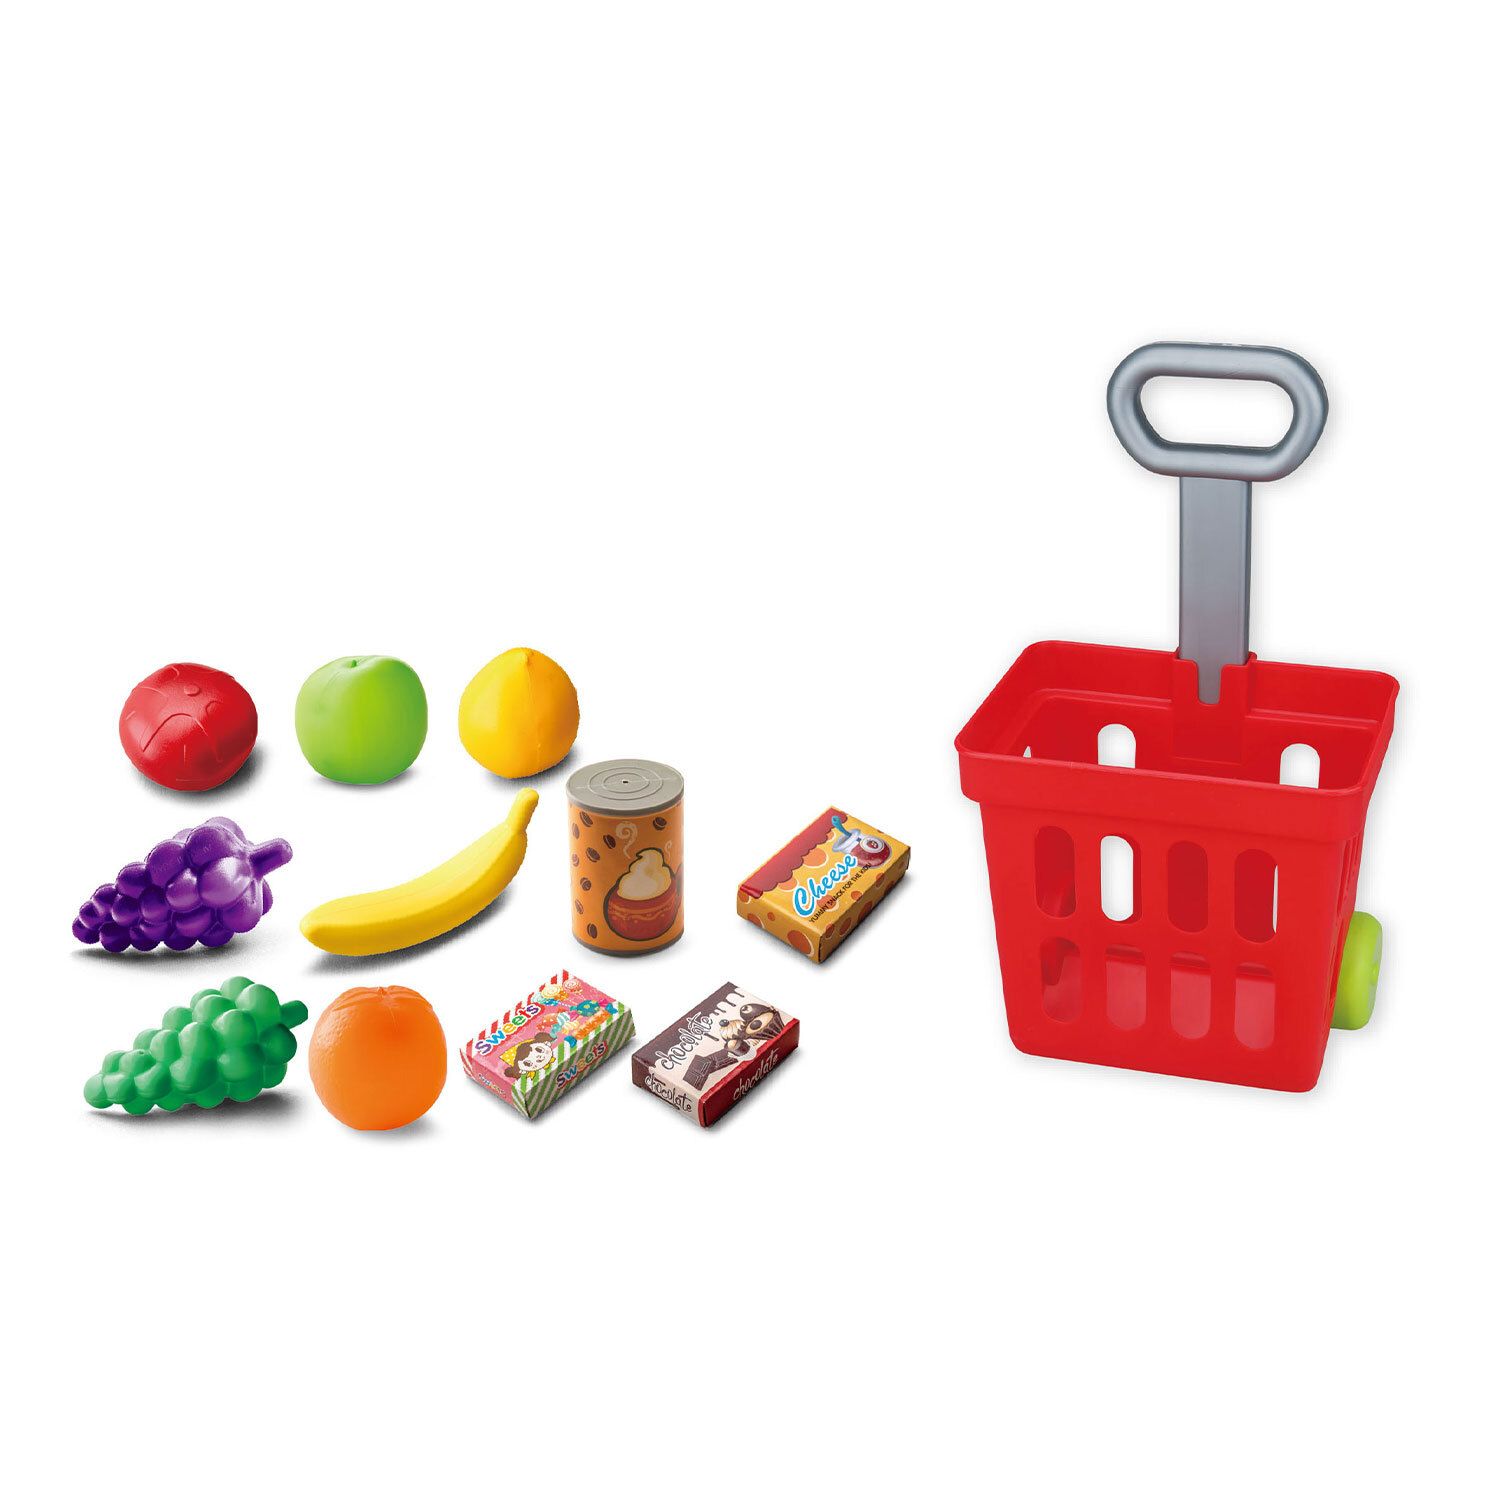 Toy Shopping Cart and Accessories Toy Image